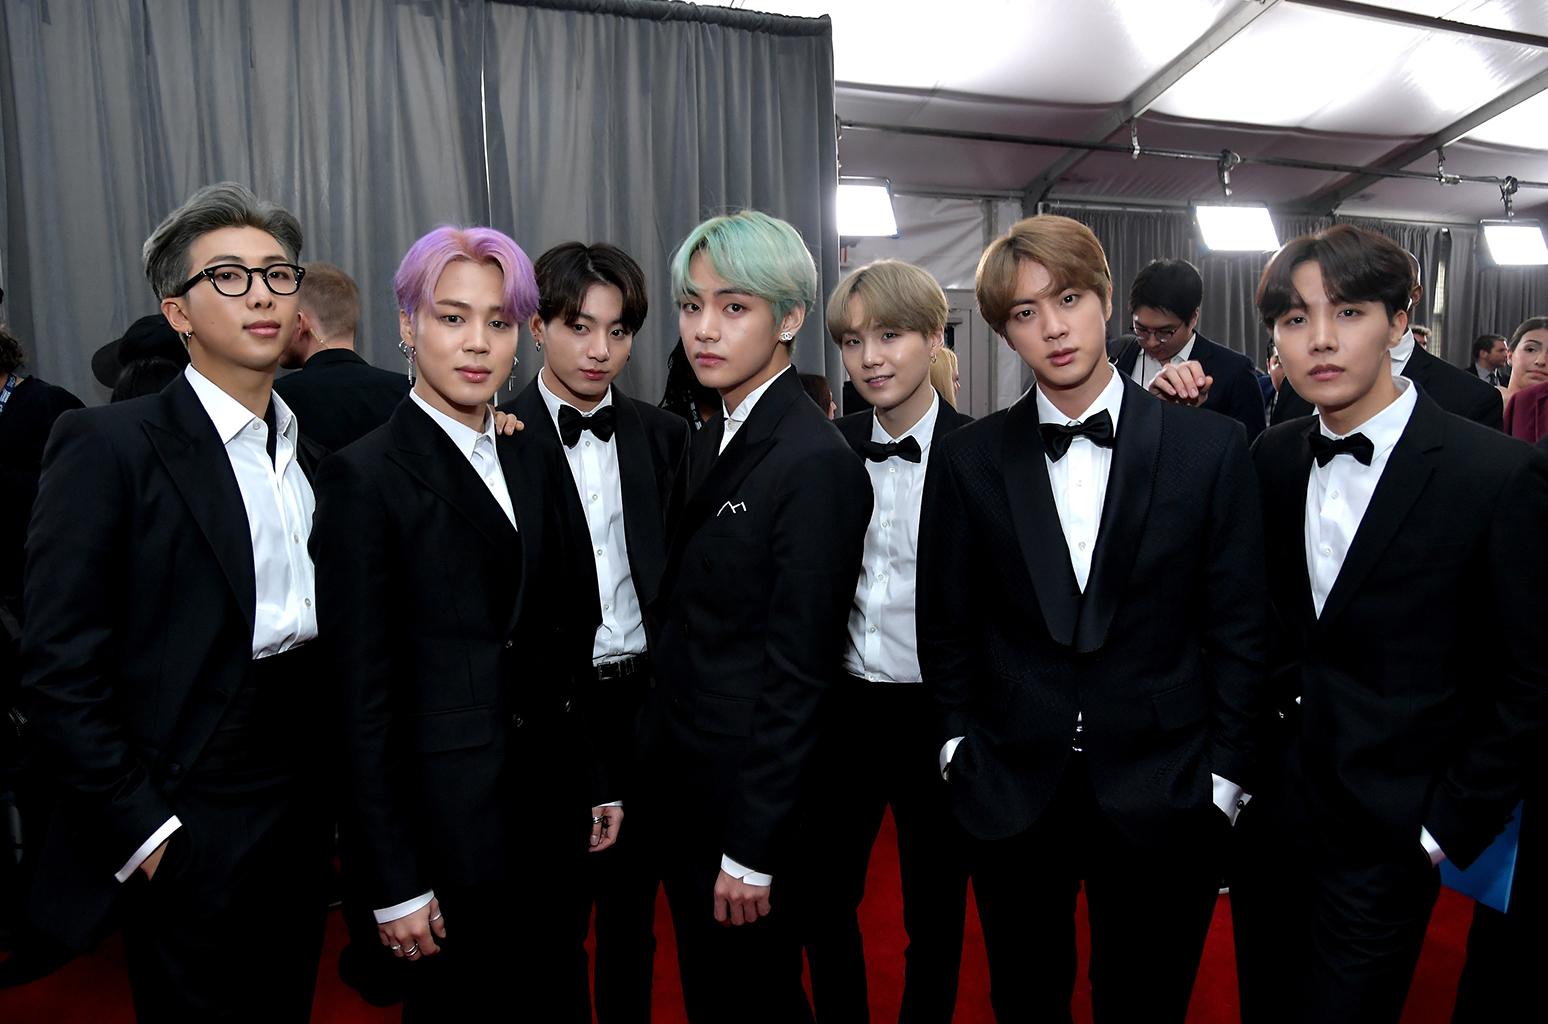 BTS At The 2019 Grammys Red Carpet: See The Photo